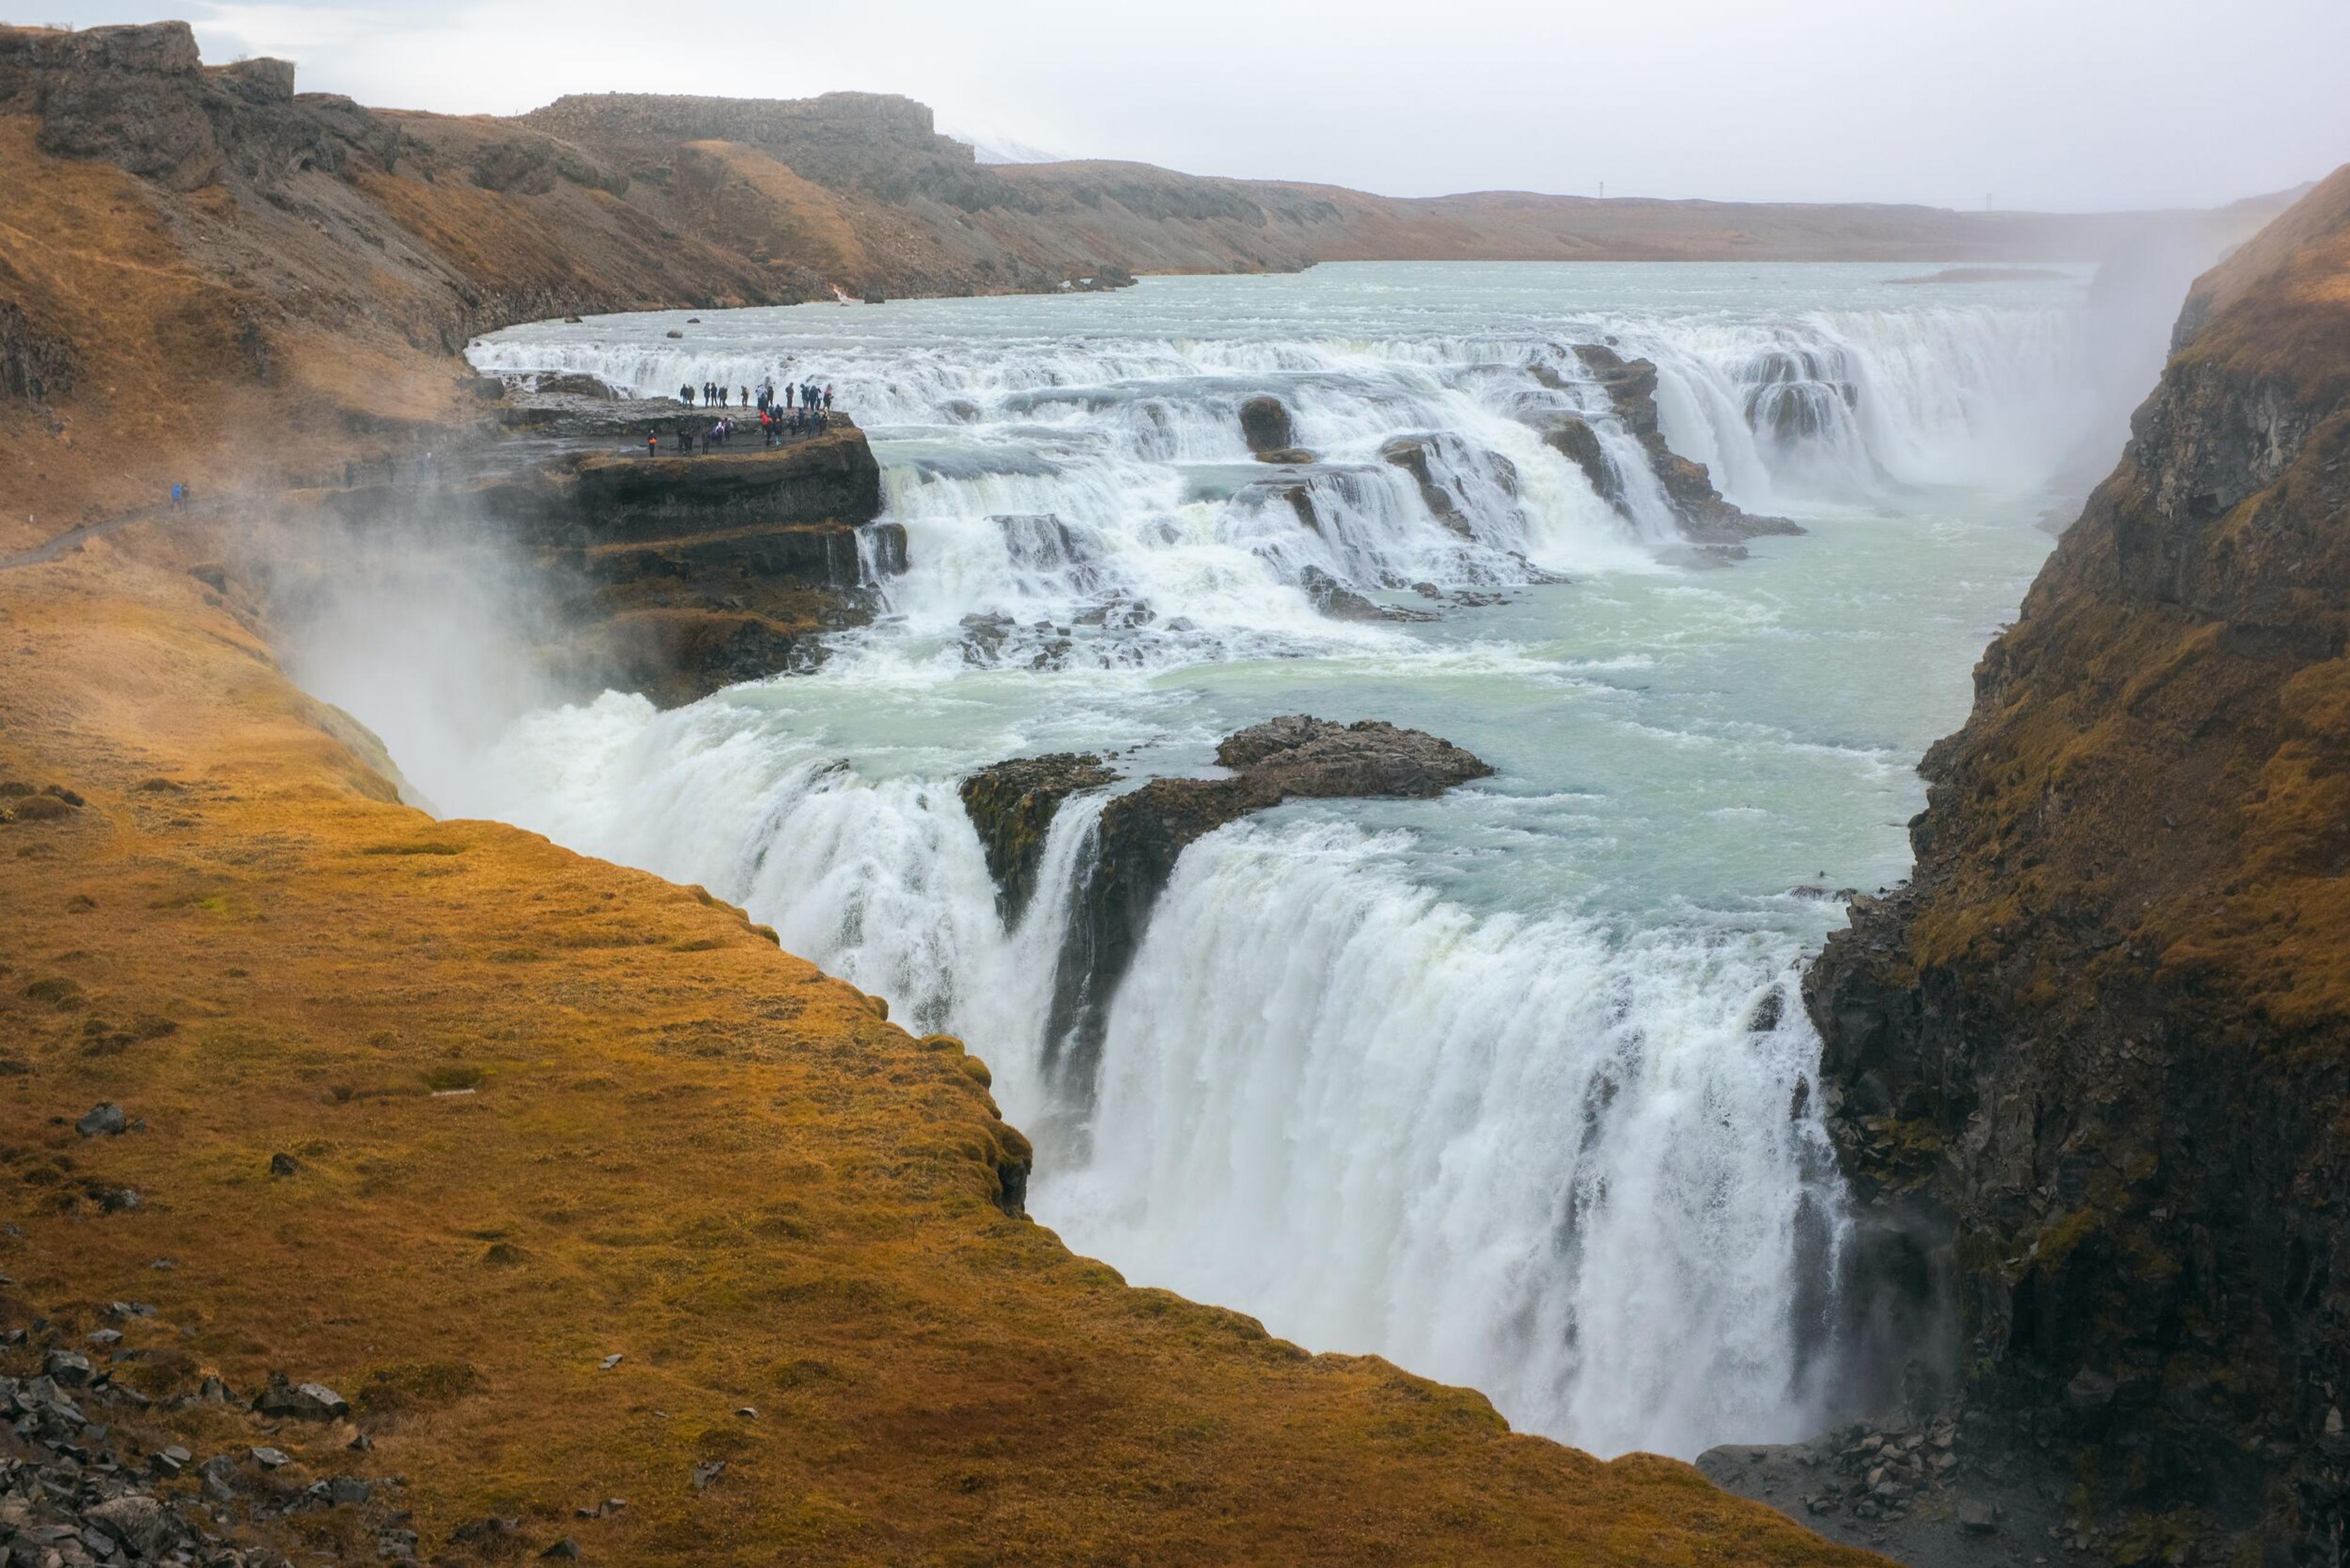 The iconic Gullfoss Waterfall in Iceland, viewed from a distance, with cascades of white water flowing over rugged cliffs, flanked by yellowed grasses and enveloped in mist, under an overcast sky, symbolizing the raw beauty of the Golden Circle.